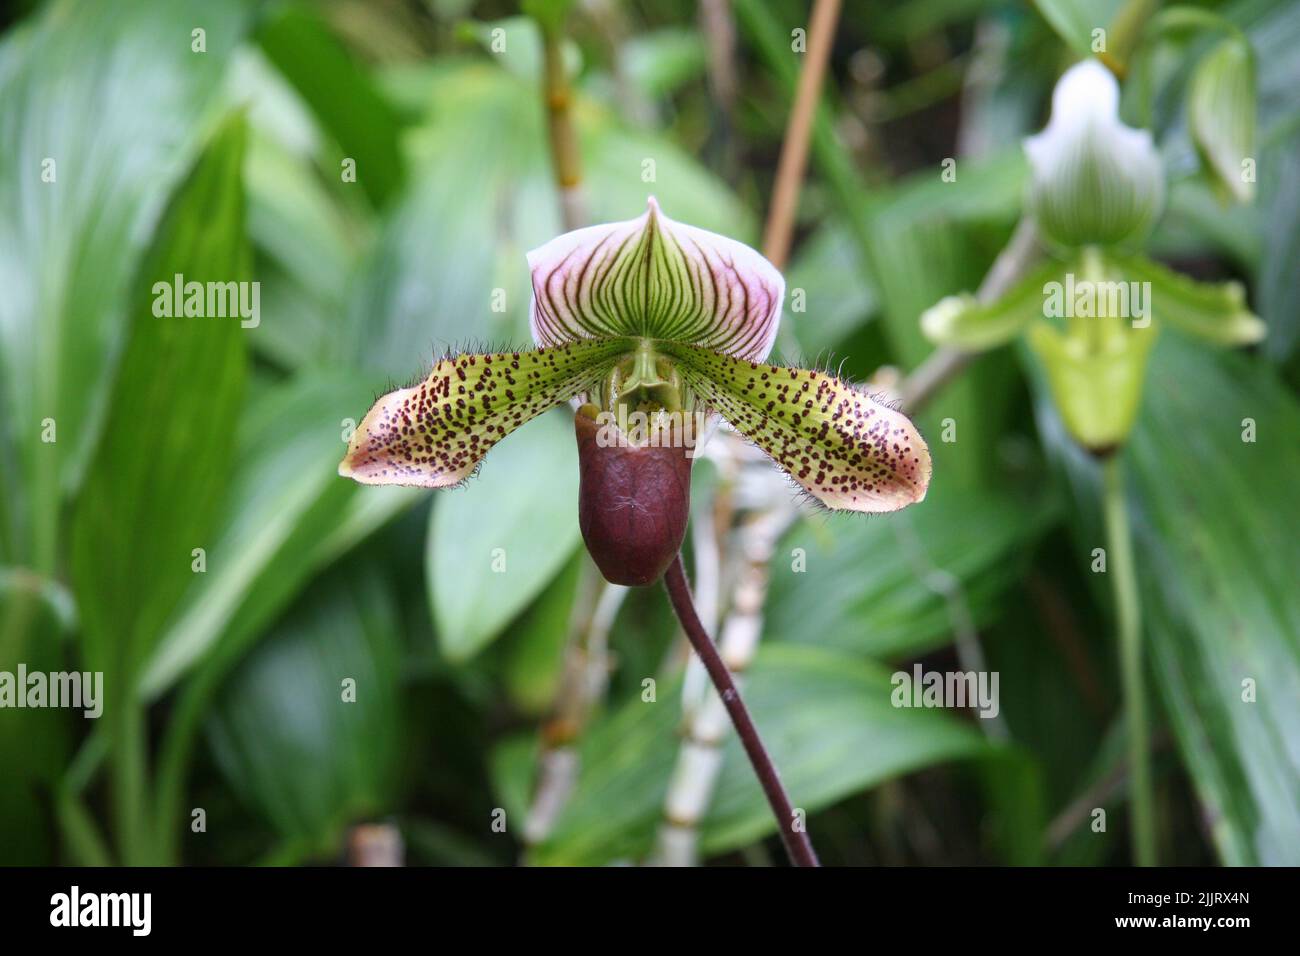 A closeup shot of a paphiopedilum ciliolare orchid flower growing in the garden on a sunny day on a blurred background Stock Photo